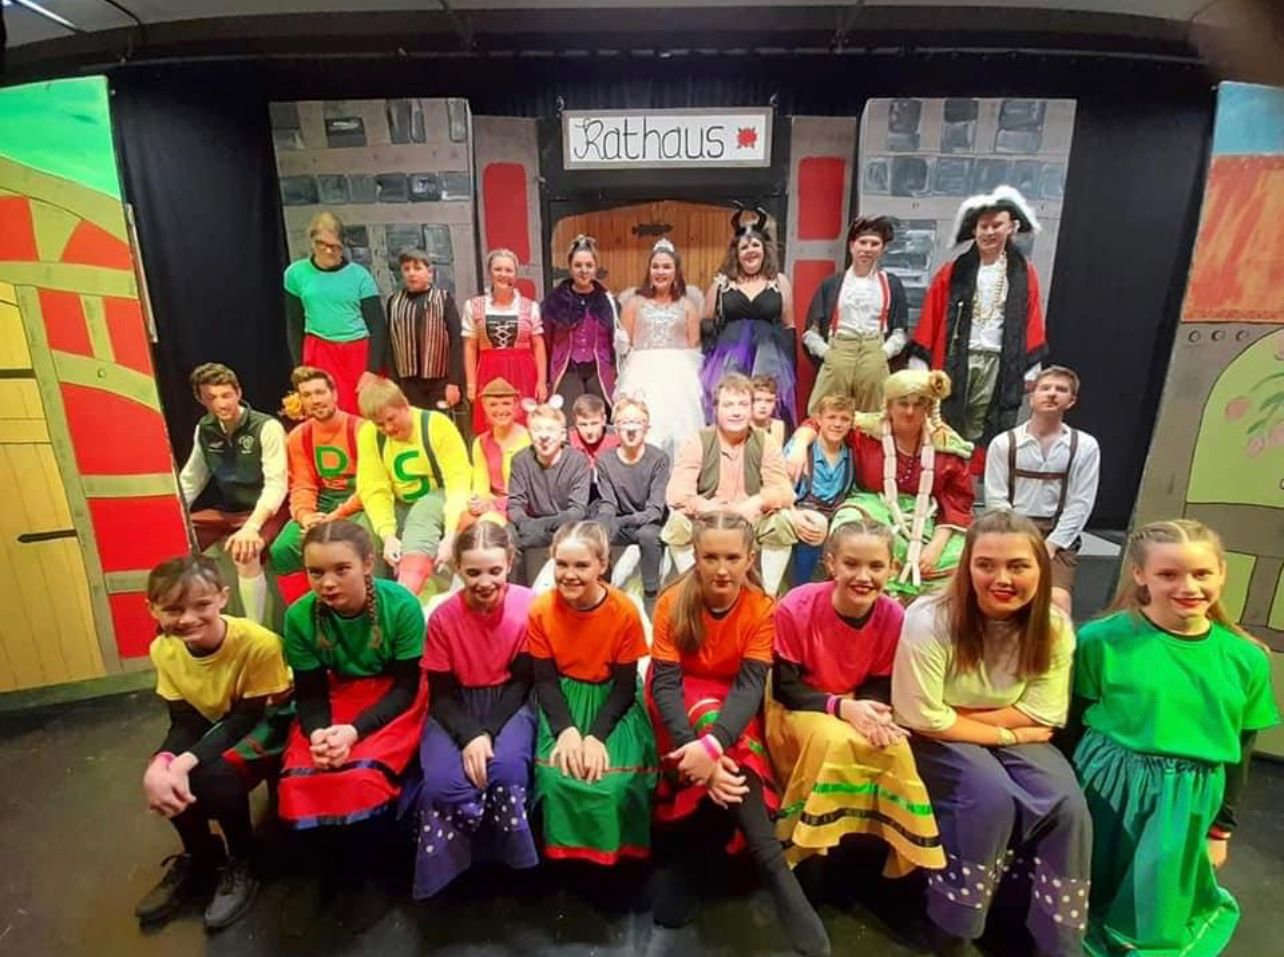 NEWS | 30 young people from a small village in North-West Herefordshire have completed the Performance Arts hattrick